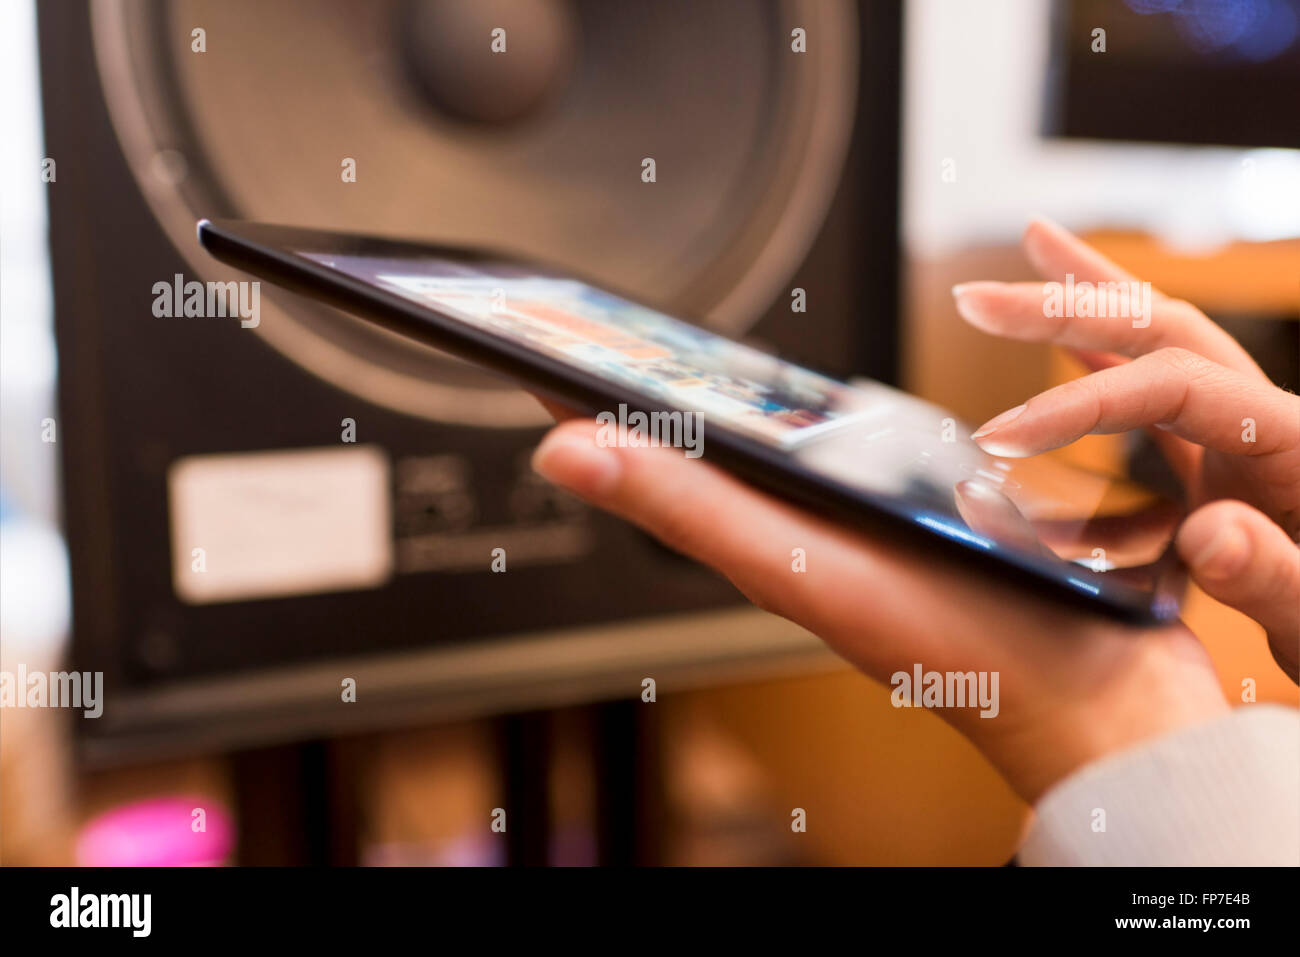 Woman listening music from a app tablet Device connected. Contactless Stock Photo